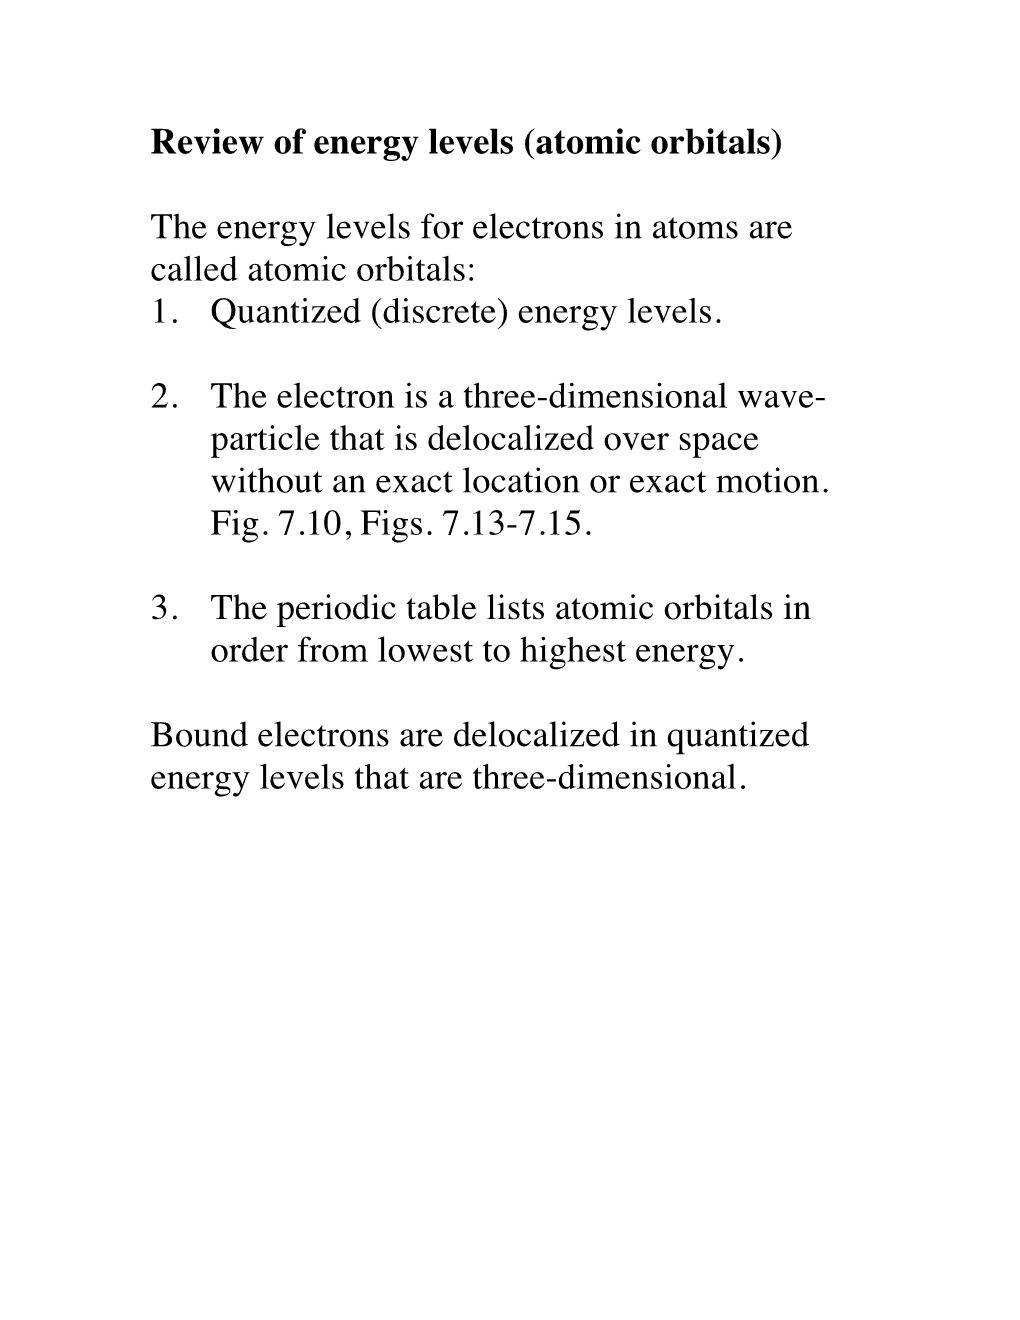 Review of Energy Levels (Atomic Orbitals)